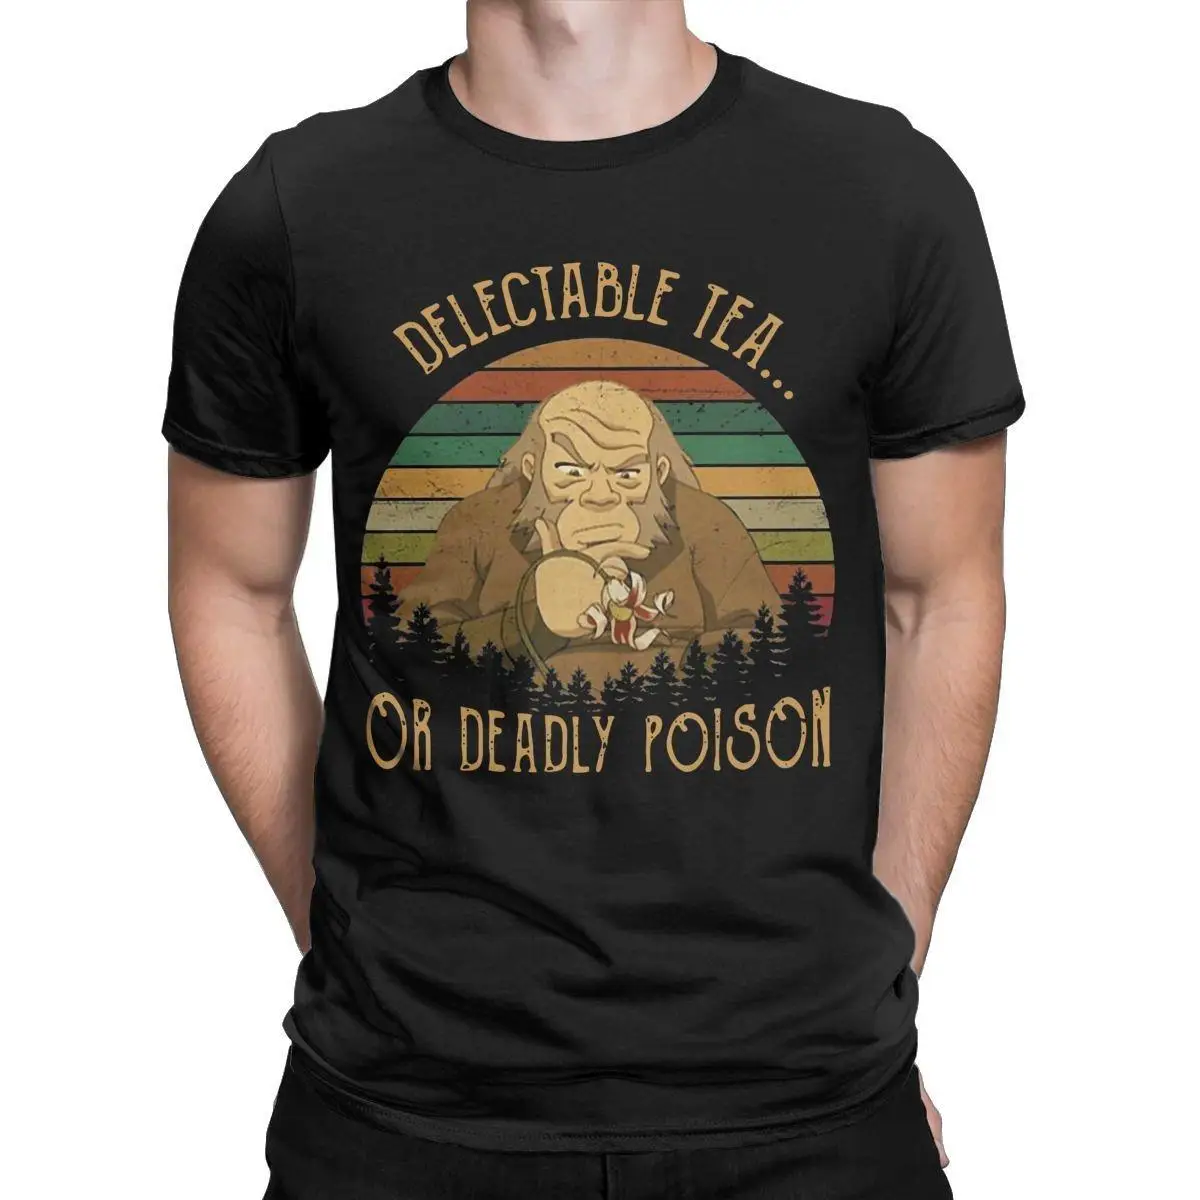 

Men T-Shirt Uncle Iroh Delectable Avatar Cotton Tee Shirt Short Sleeve Tea or Deadly Poison Sunset T Shirts Round Neck Clothes